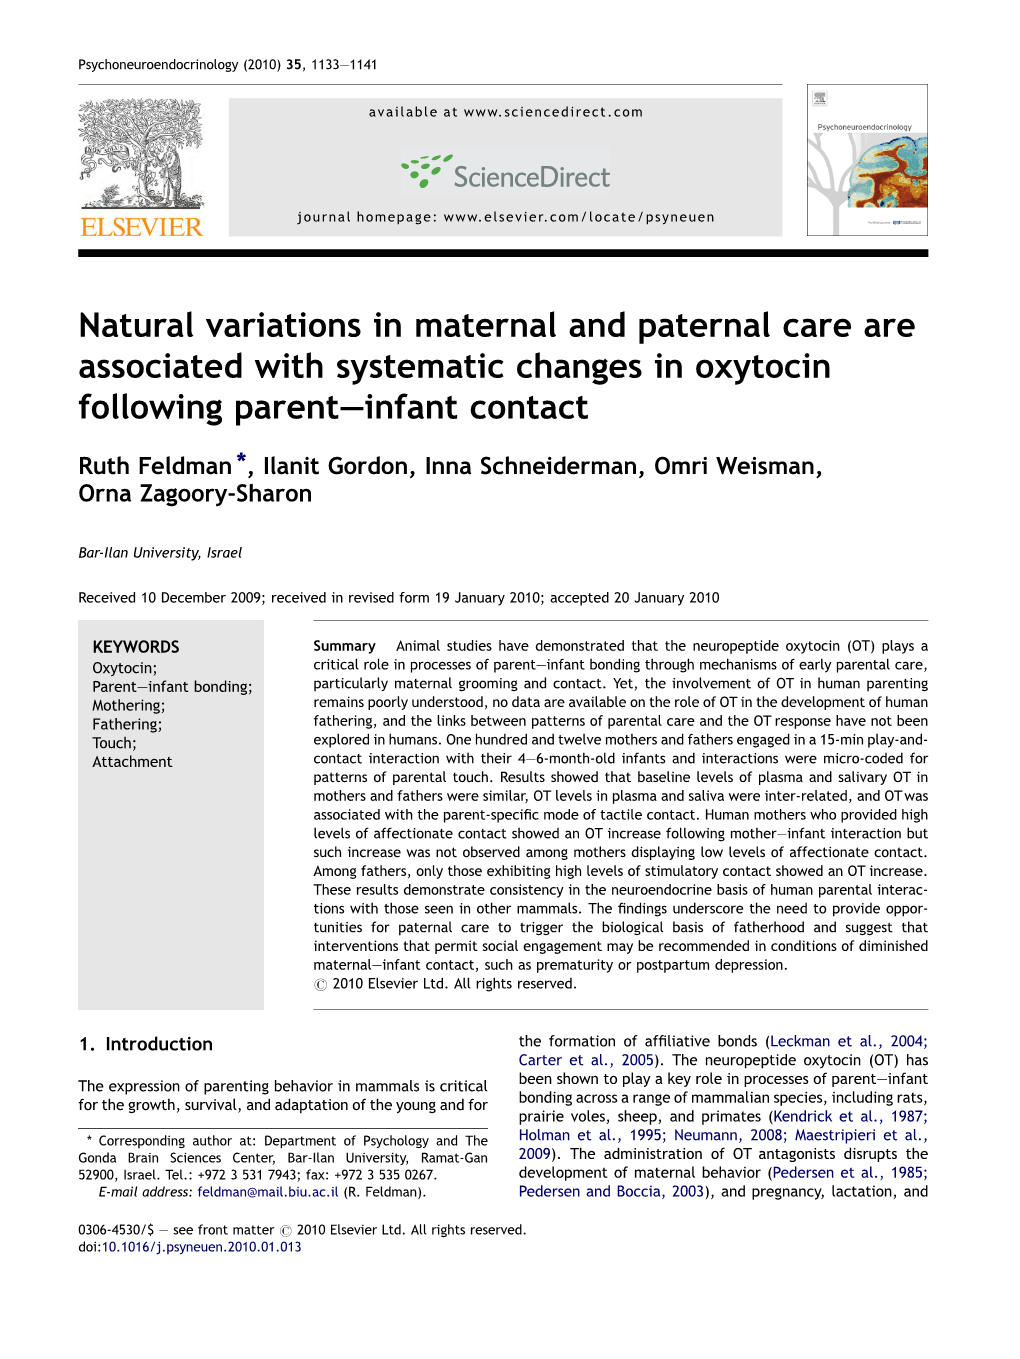 Natural Variations in Maternal and Paternal Care Are Associated with Systematic Changes in Oxytocin Following Parent—Infant Contact